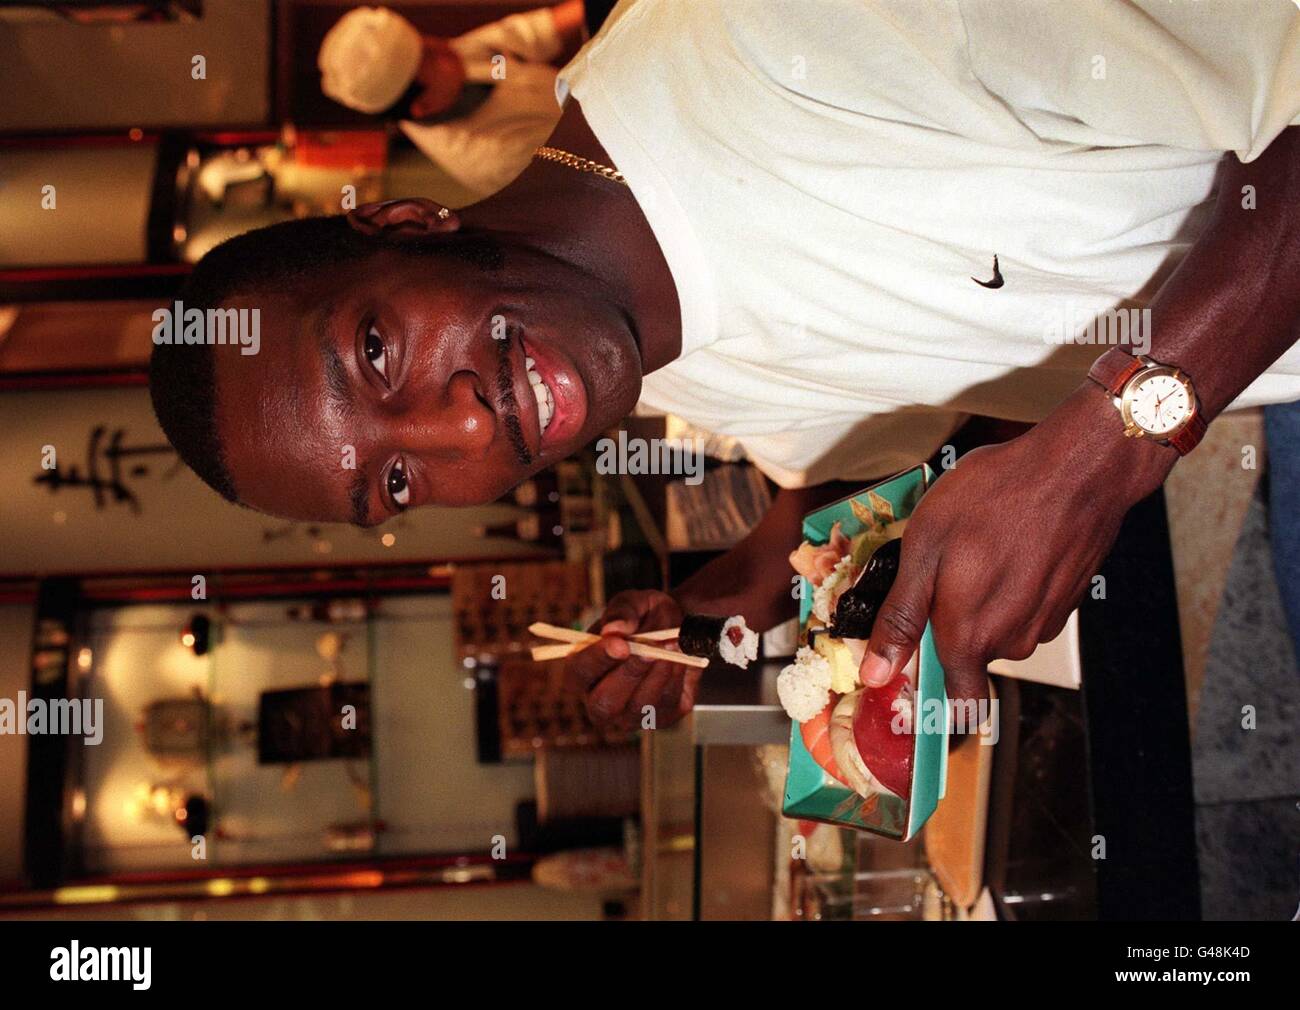 American record-breaking athlete, Michael Johnson, takes time out for a snack in the sushi bar at Harrods department store in London today (Saturday), before he heads the bill in tomorrow's three-cornered Spar British Challenge at Crystal Palace. Photo by Tony Harris. See PA Story ATHLETICS Johnson. Stock Photo